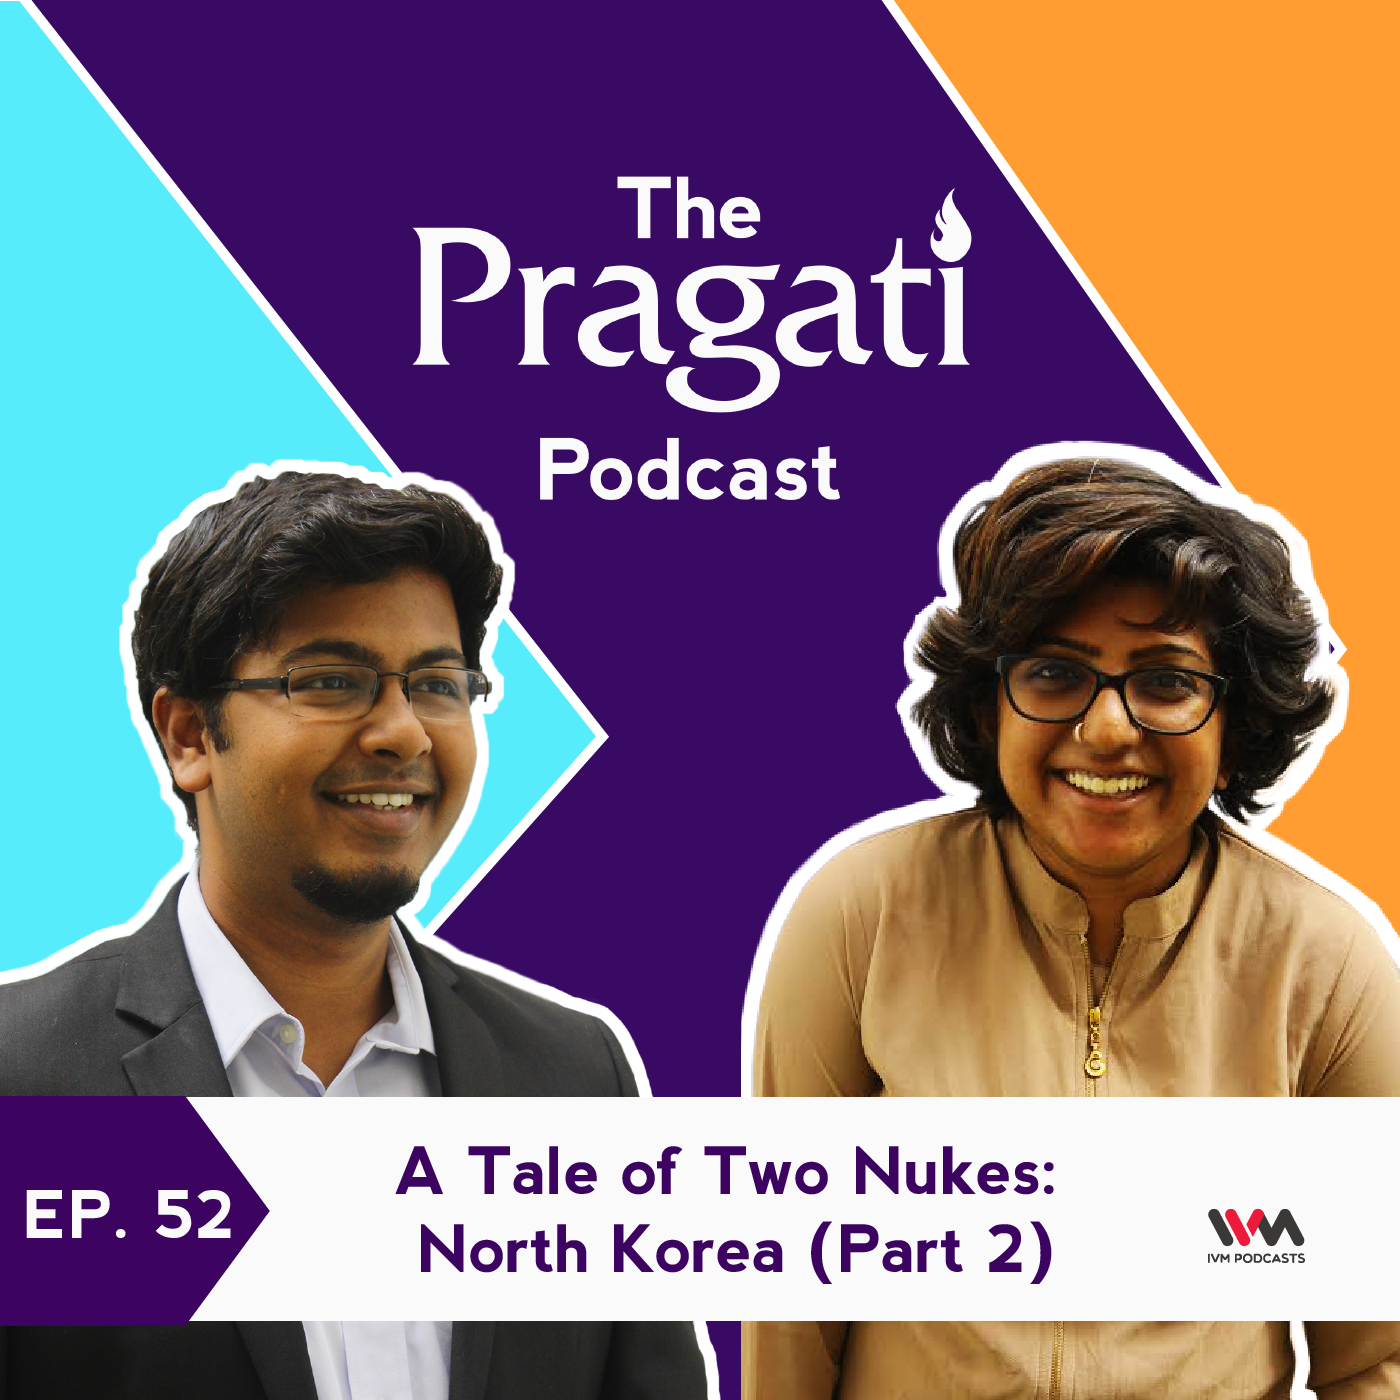 Ep. 52: A Tale of Two Nukes: North Korea (Part 2)